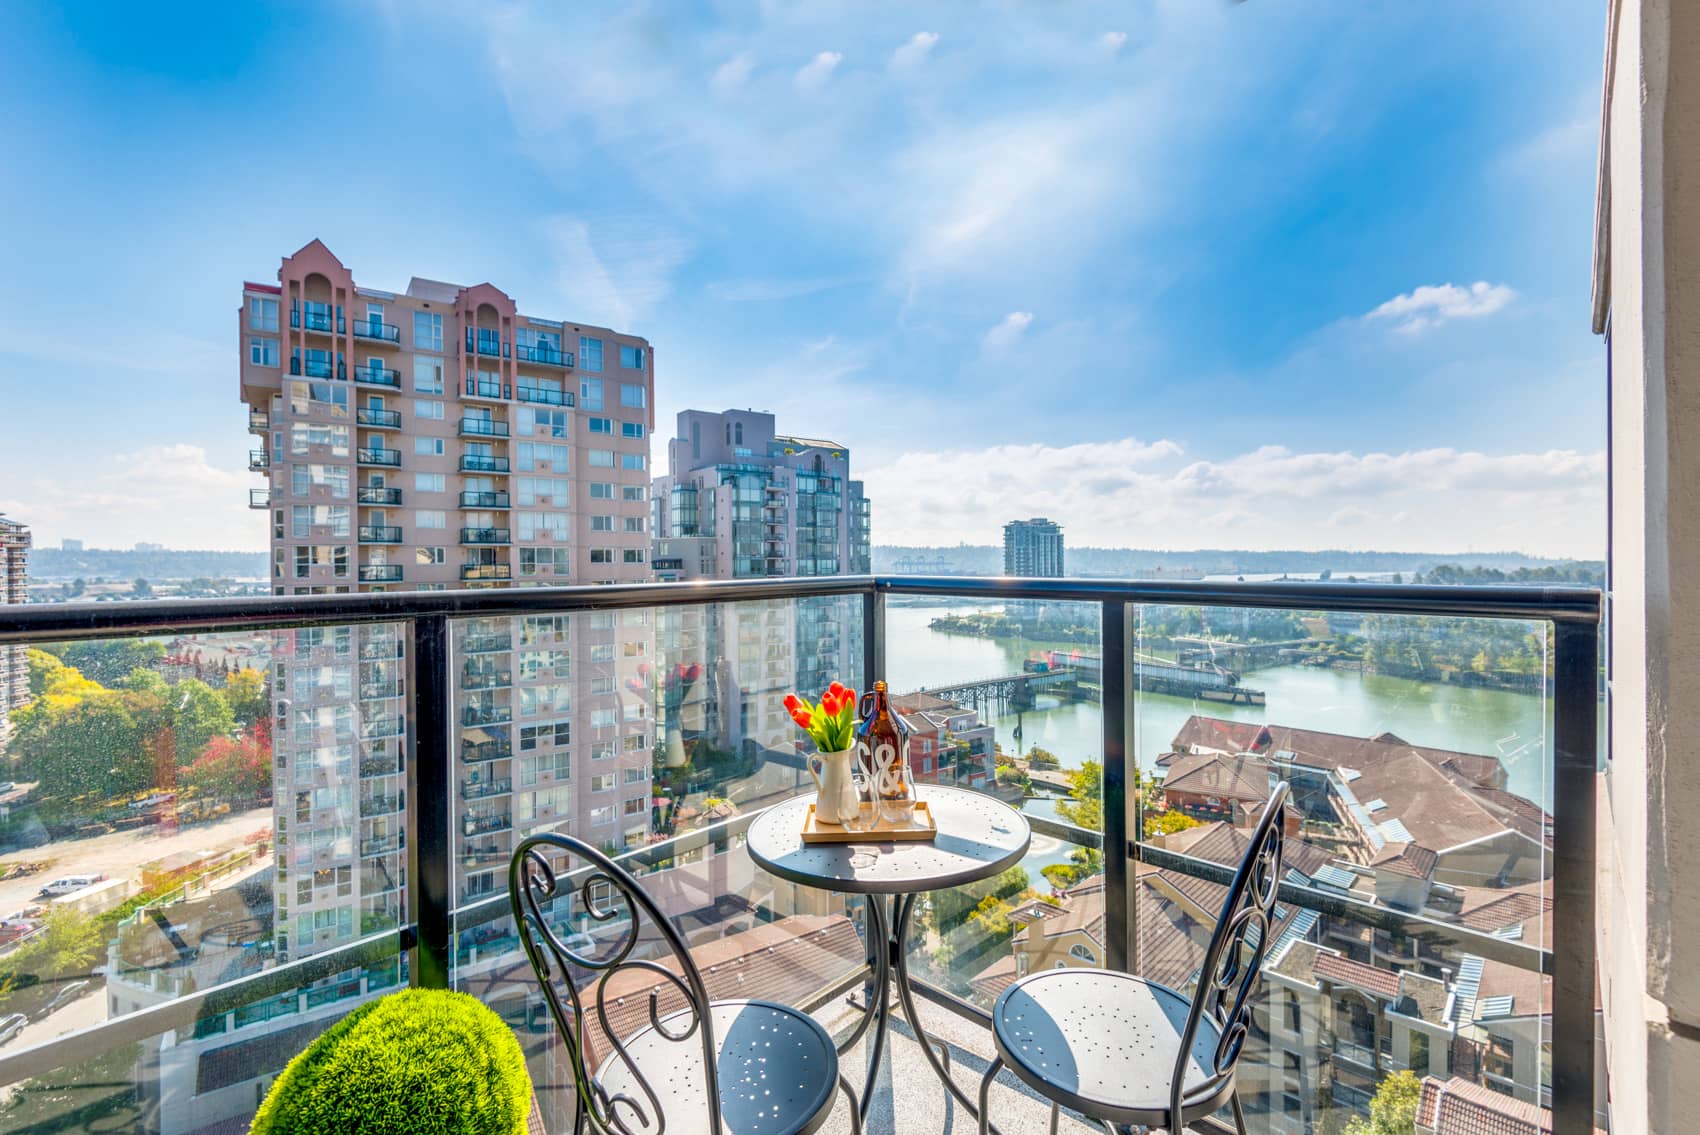 2 Bedroom Condo by The Quay With Stunning Views